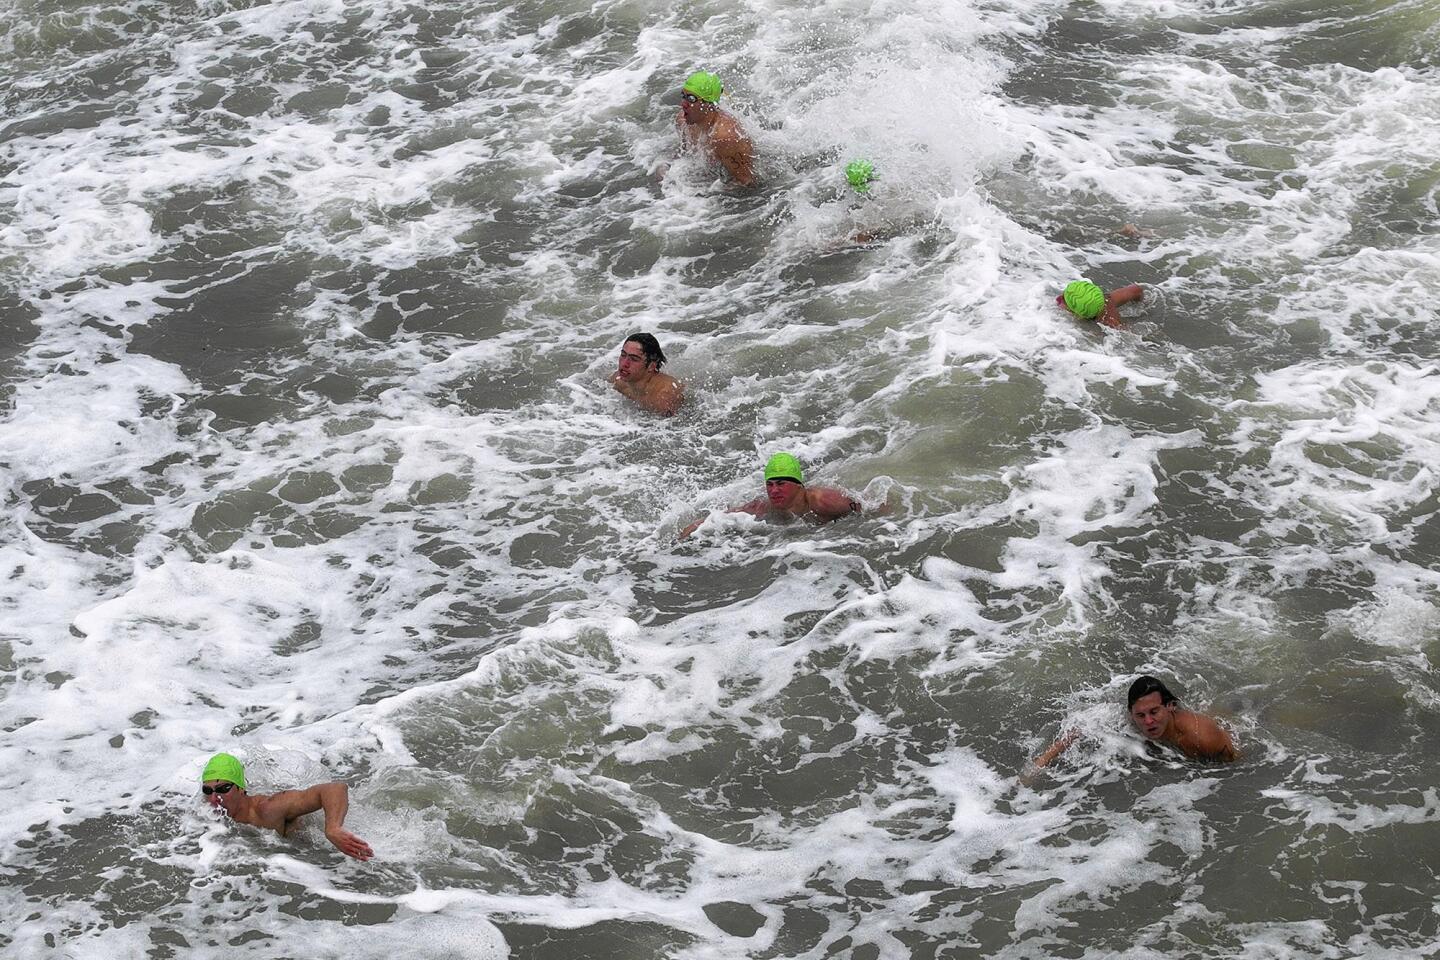 Candidates swim next to the pier during the city of Huntington Beach's ocean lifeguard tryouts on Saturday.